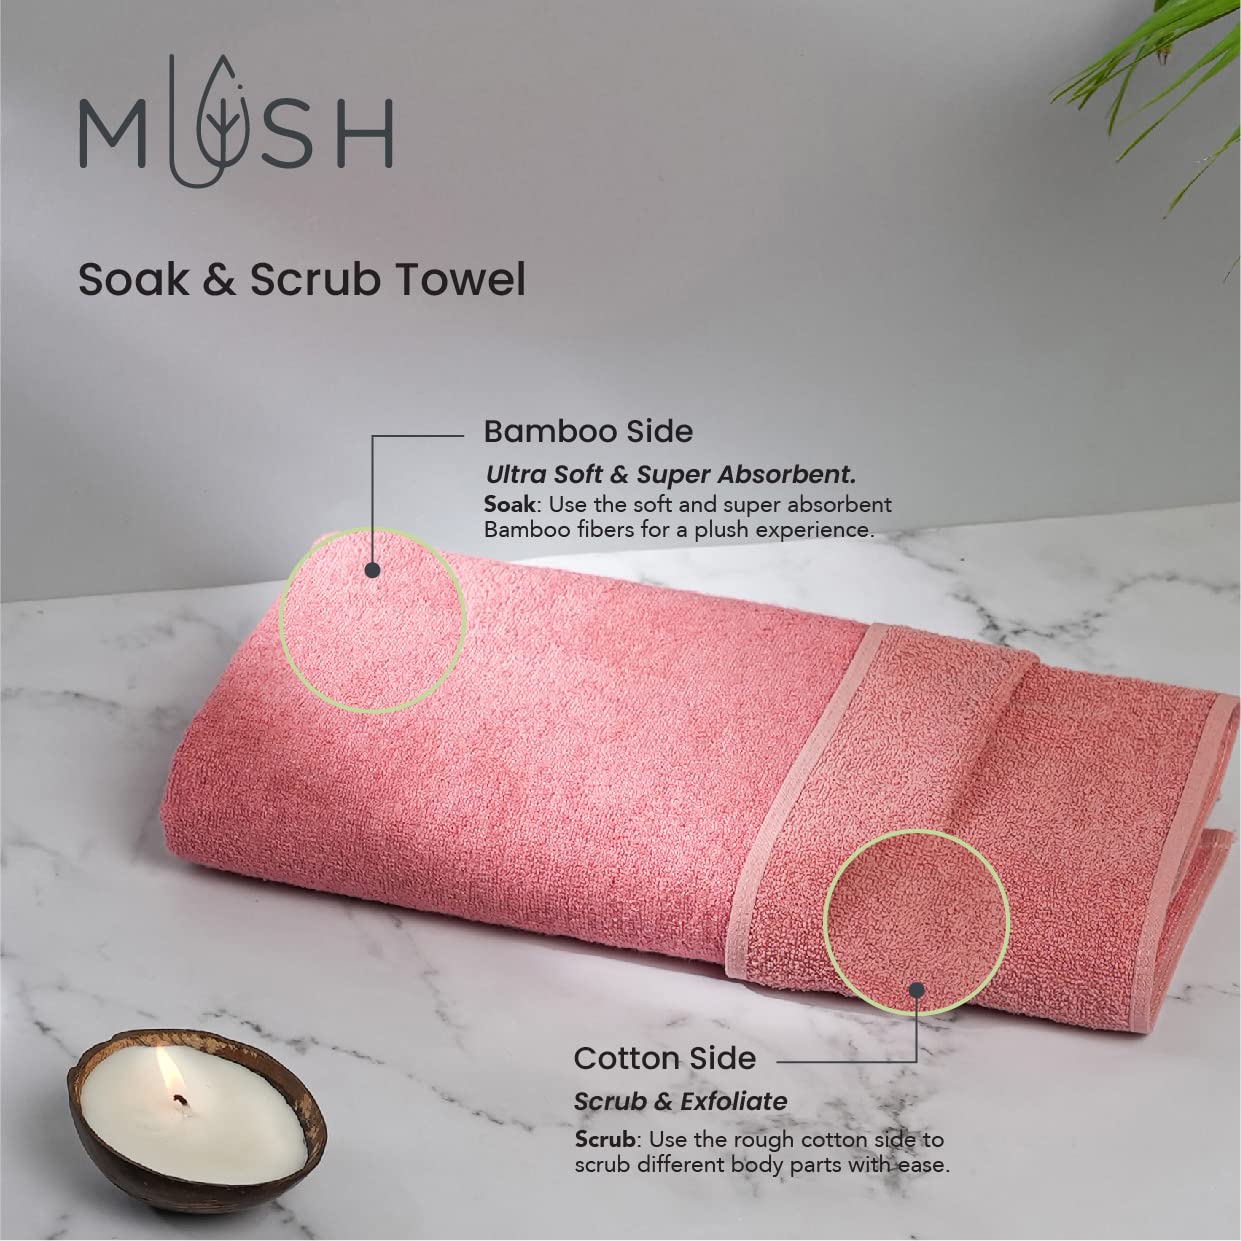 Mush Duo - One Side Soft Bamboo Other Side Rough Cotton - Special Dual Textured Towel for Gentle Cleanse & Exfoliation (1, Coral Orange)